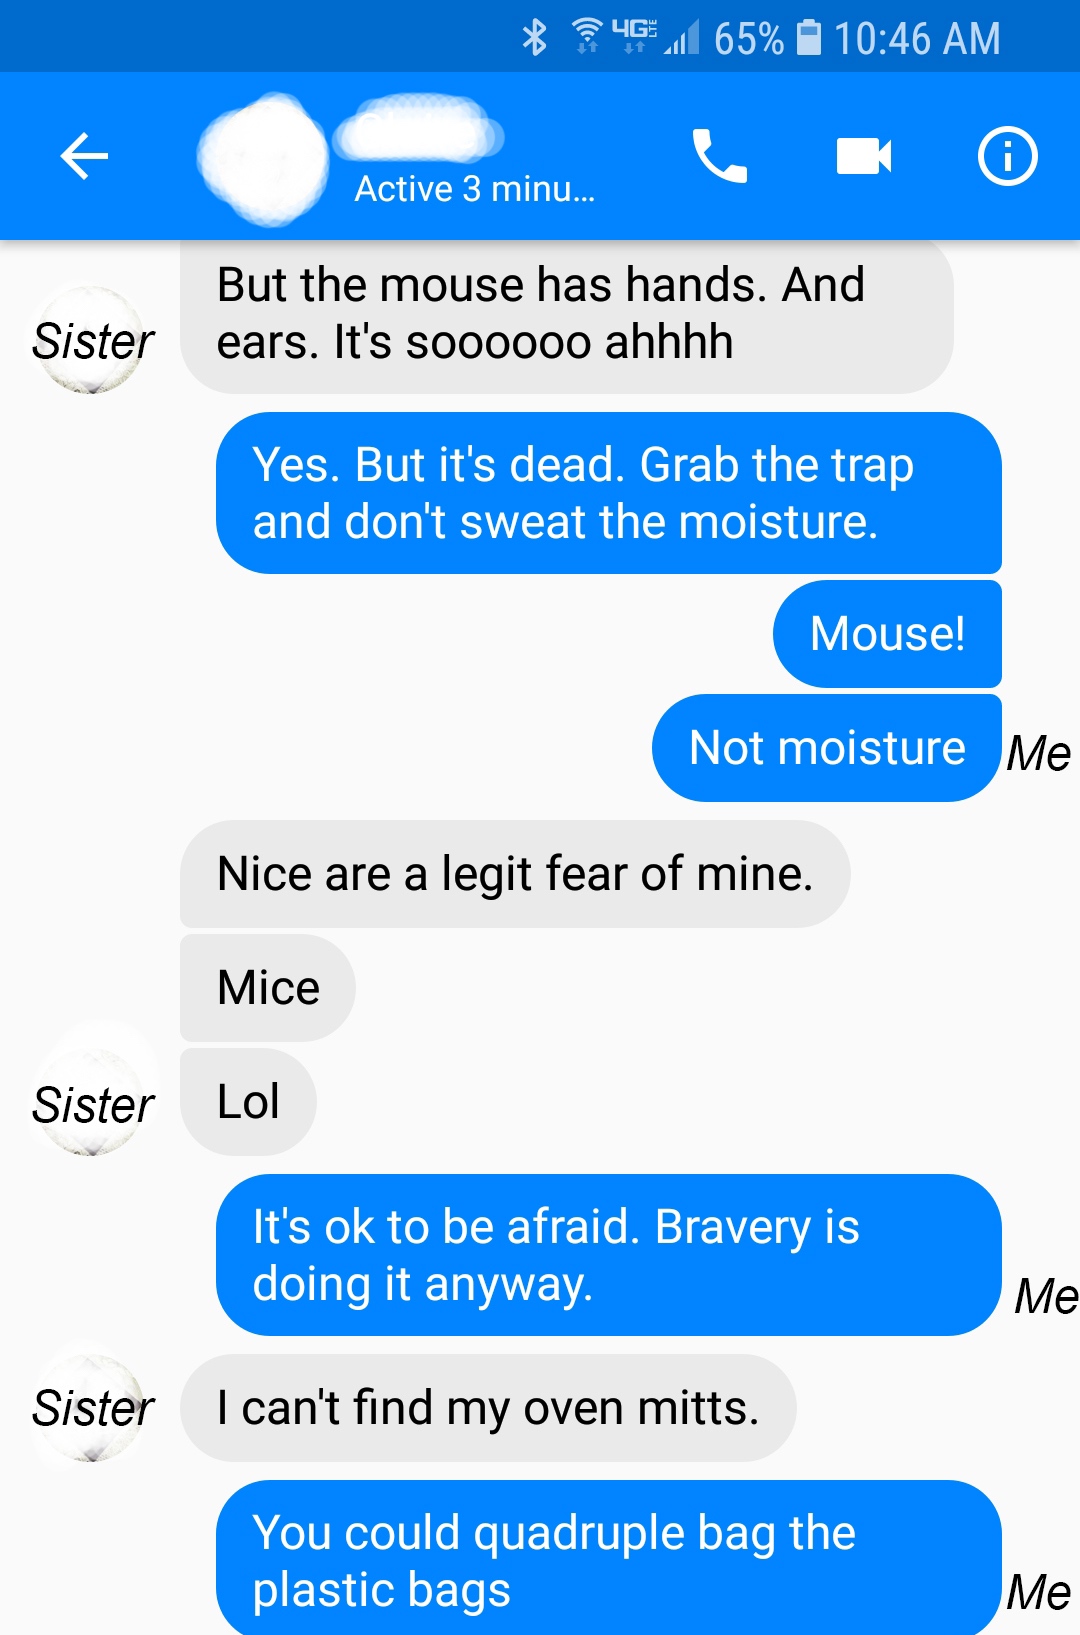 Guy Talks His Squeamish Sister Through Disposing of Dead Mouse